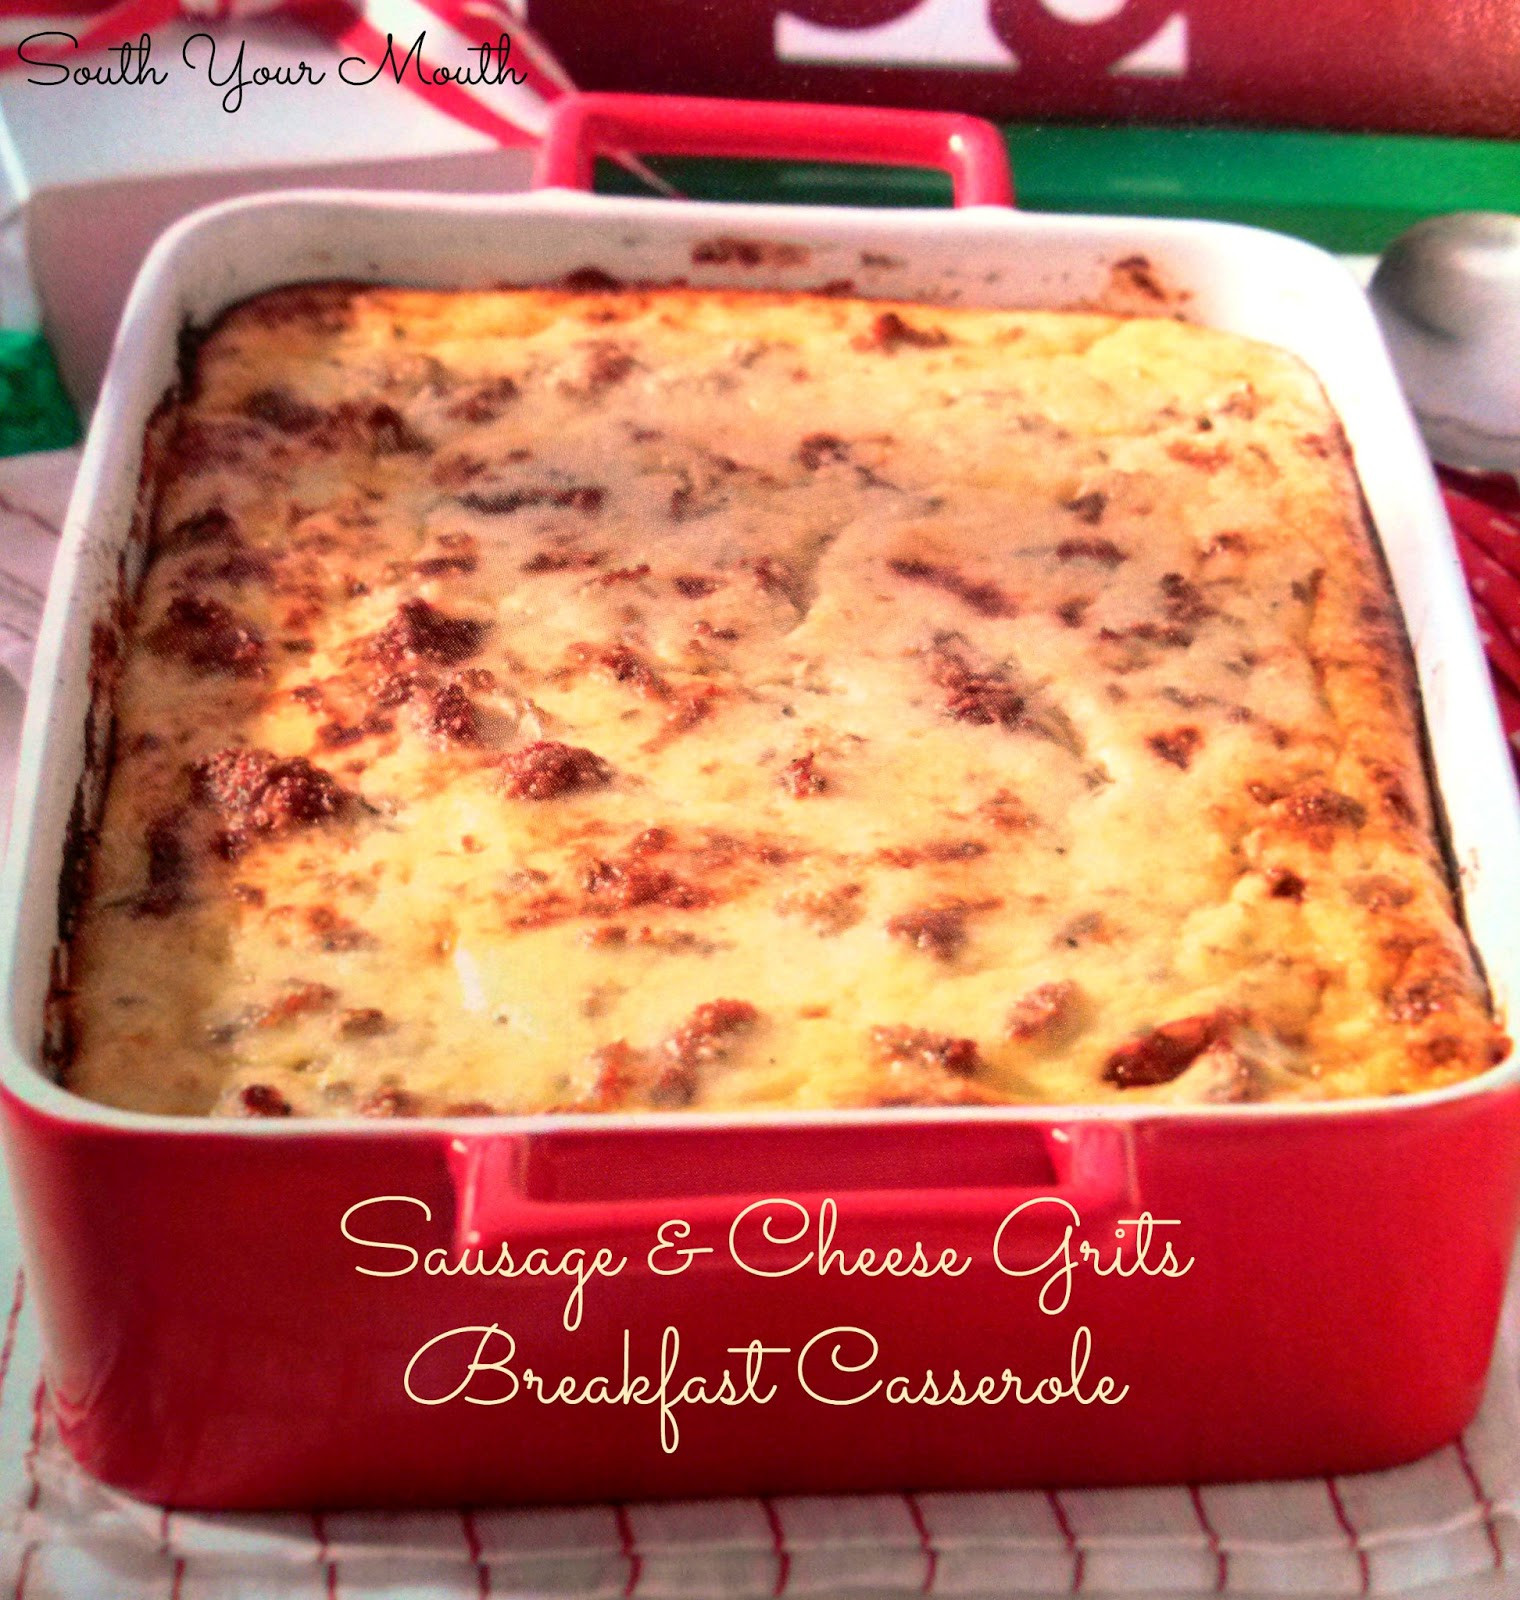 Grits Breakfast Recipes
 South Your Mouth Sausage & Cheese Grits Breakfast Casserole